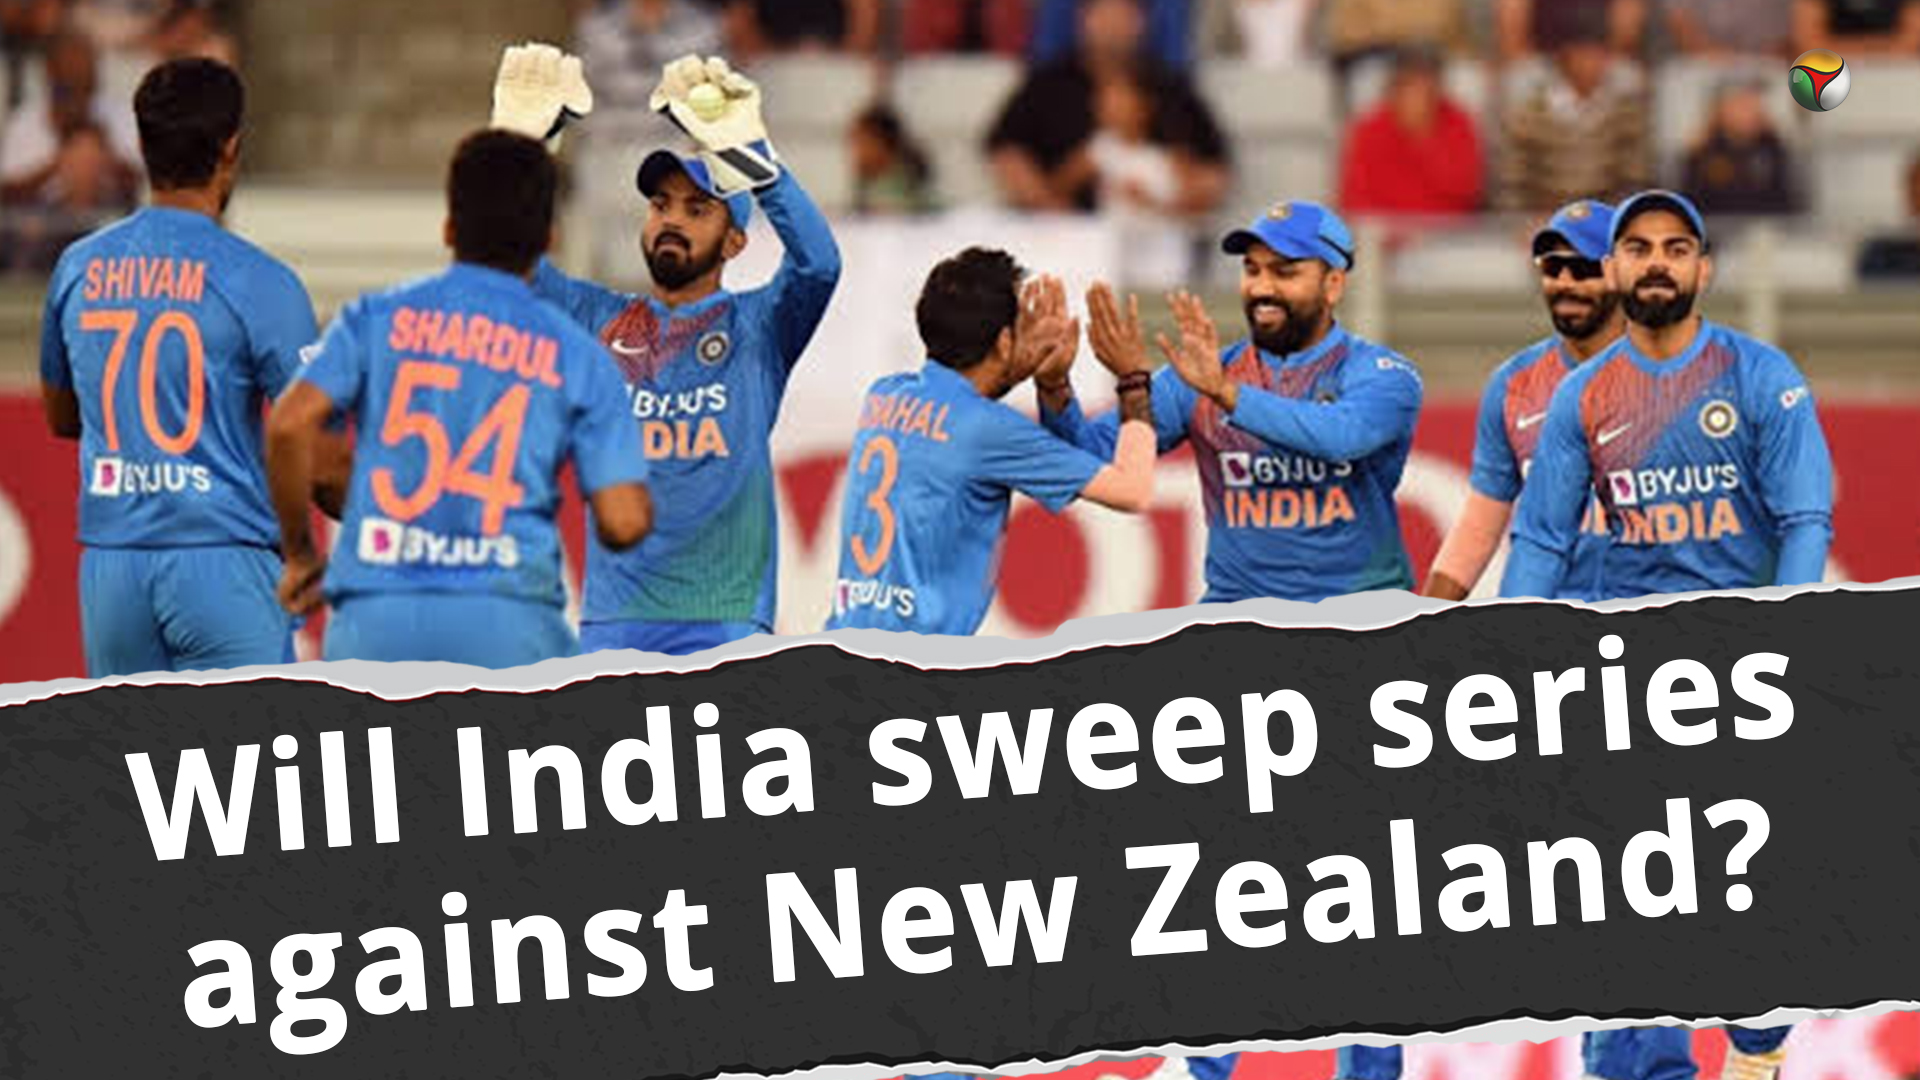 Will India sweep series against New Zealand?